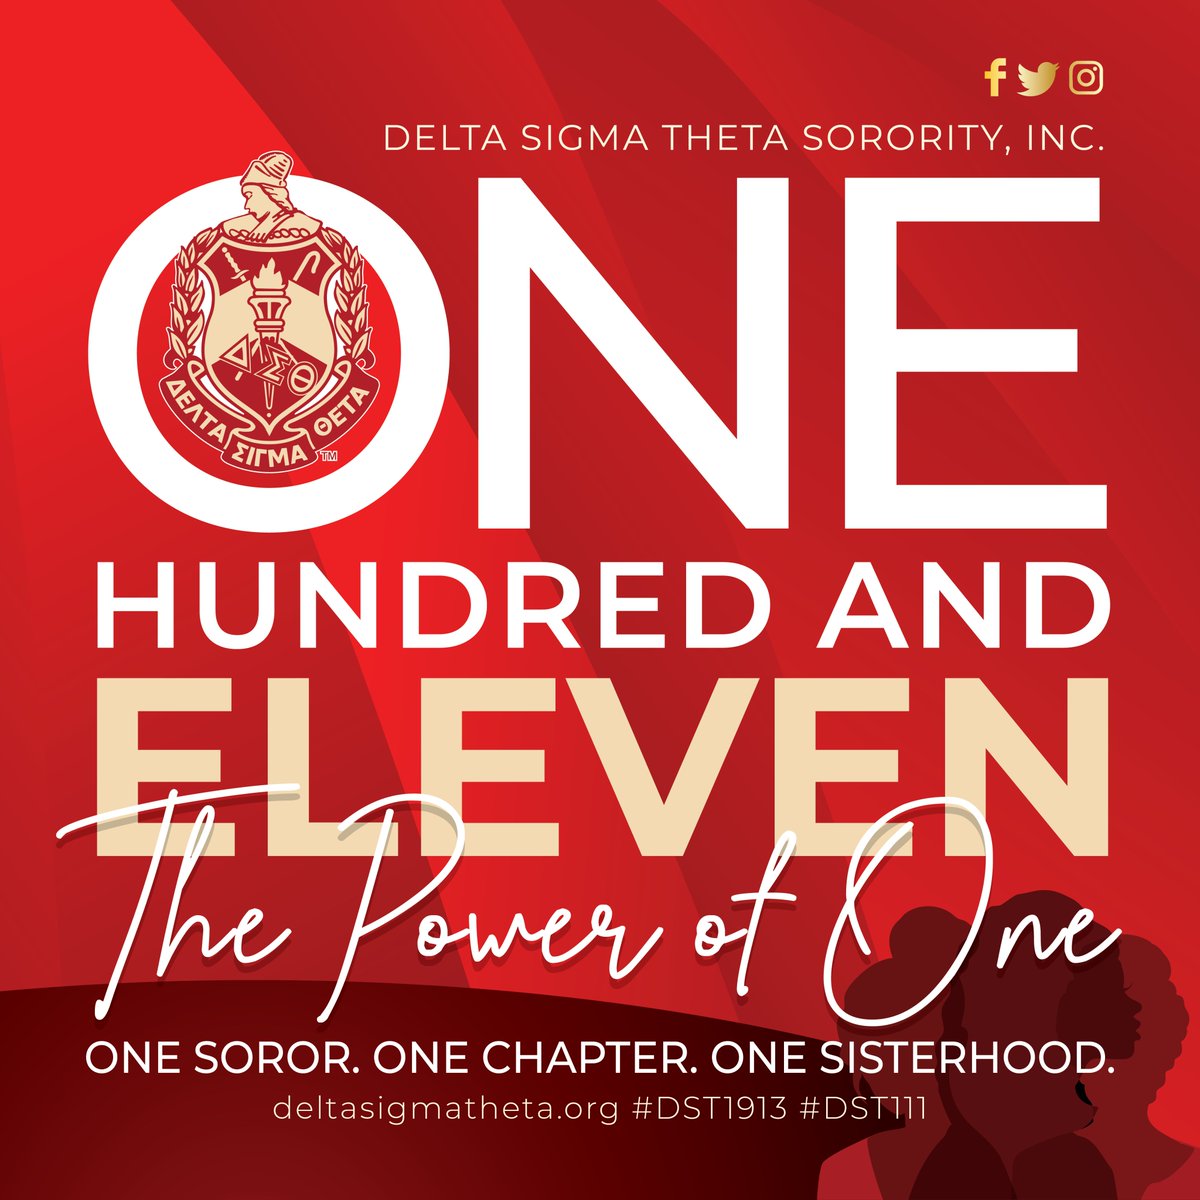 At the founding of Delta Sigma Theta Sorority, Incorporated we were one chapter, one sisterhood ignited by the passion and purpose of our 22 Founders. Today, we boast over 1,050 chapters worldwide. #DST1913